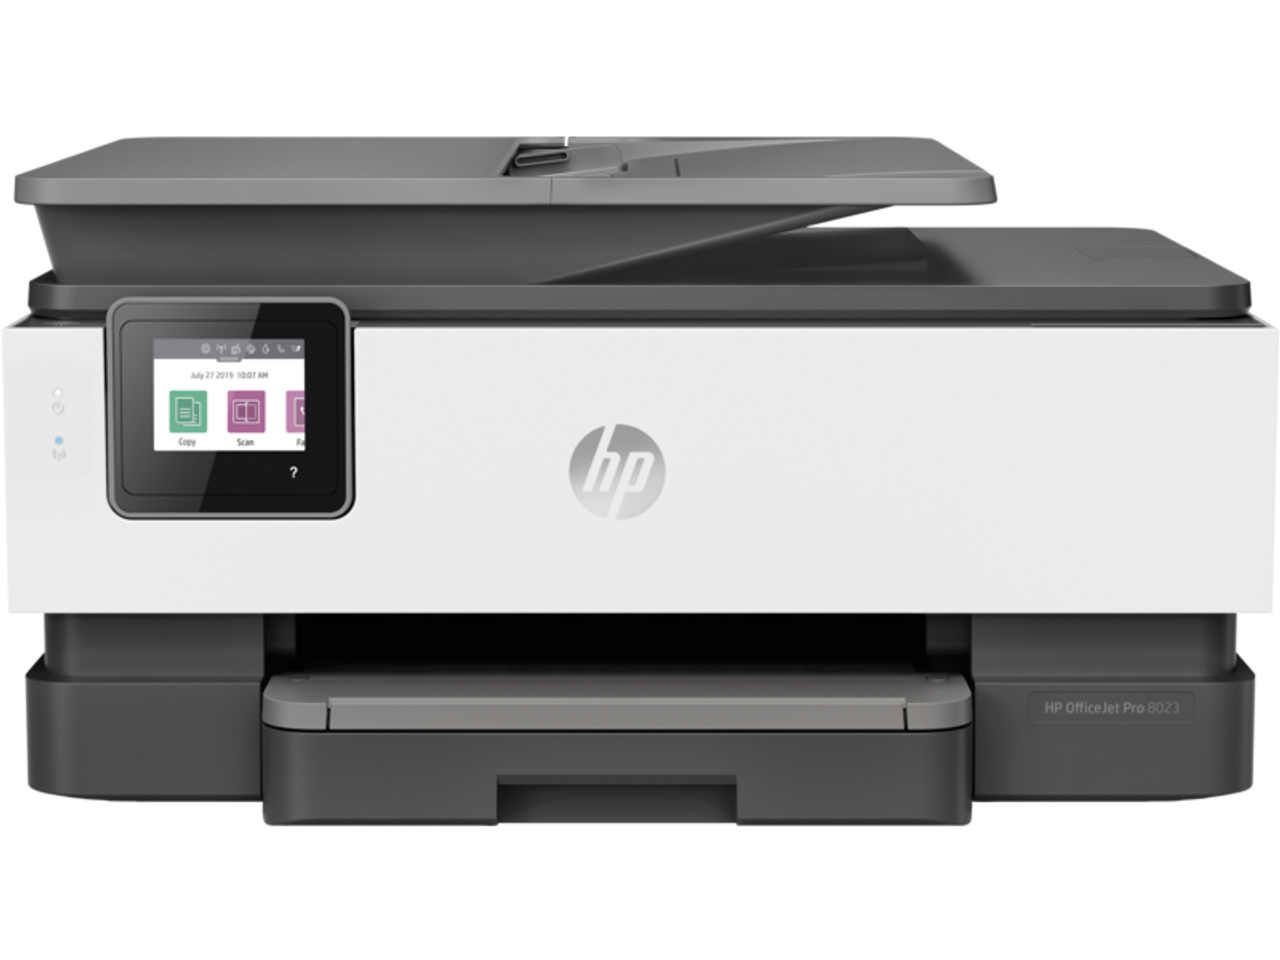 HP OfficeJet Pro 8023 All-in-One A4 up to 20ppm Printer 1KR64B